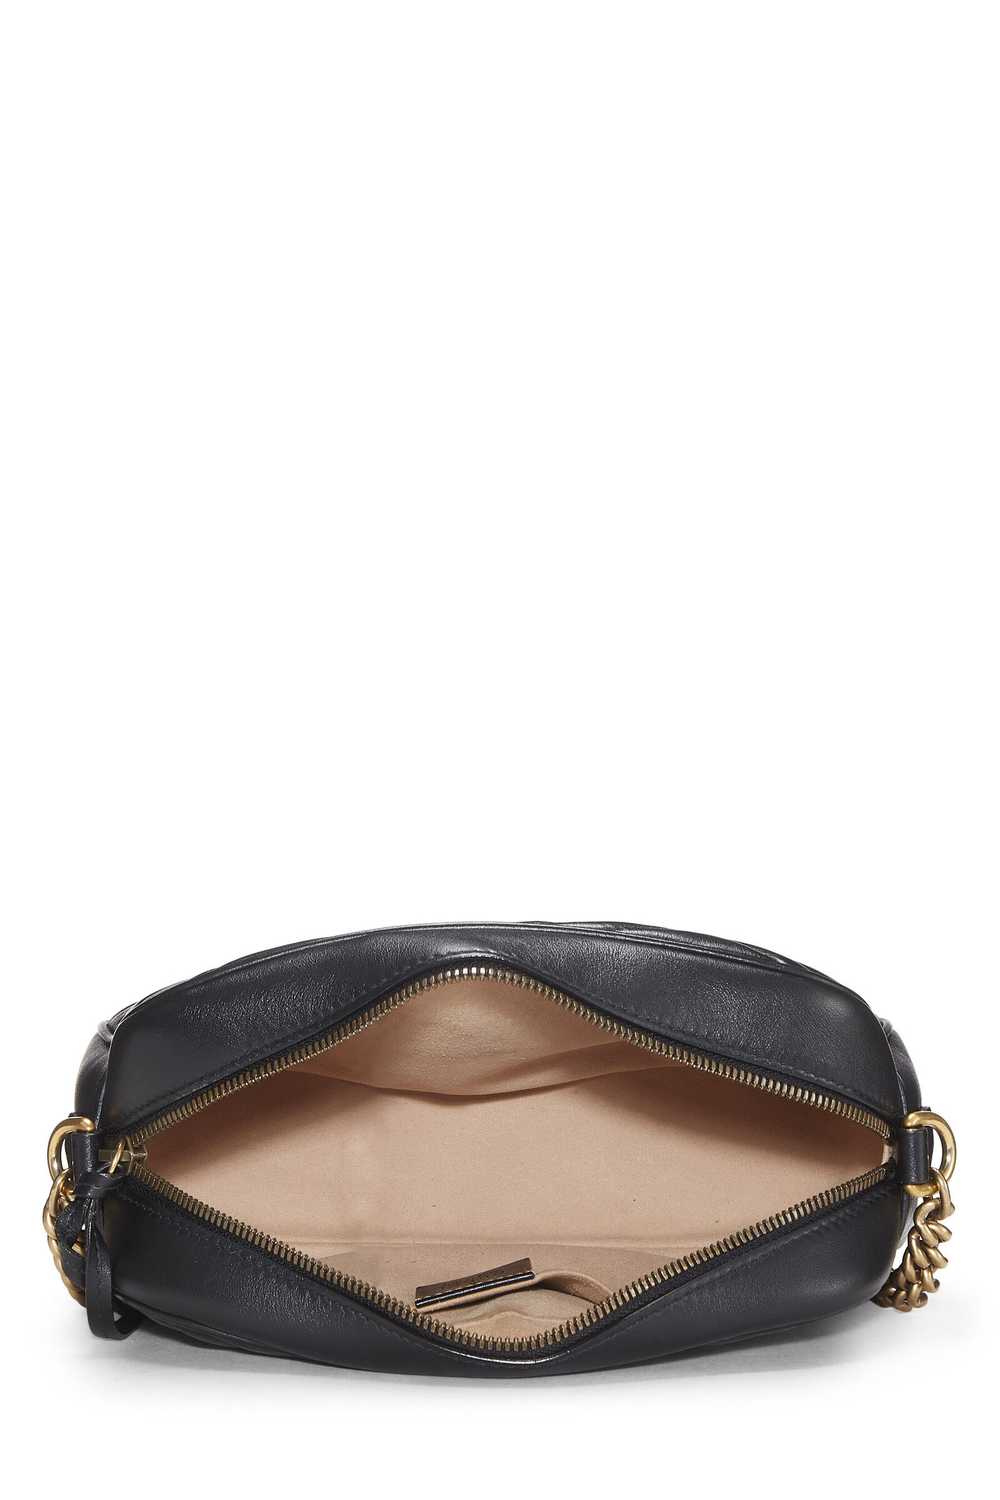 Black Leather GG Marmont Crossbody Small - image 6